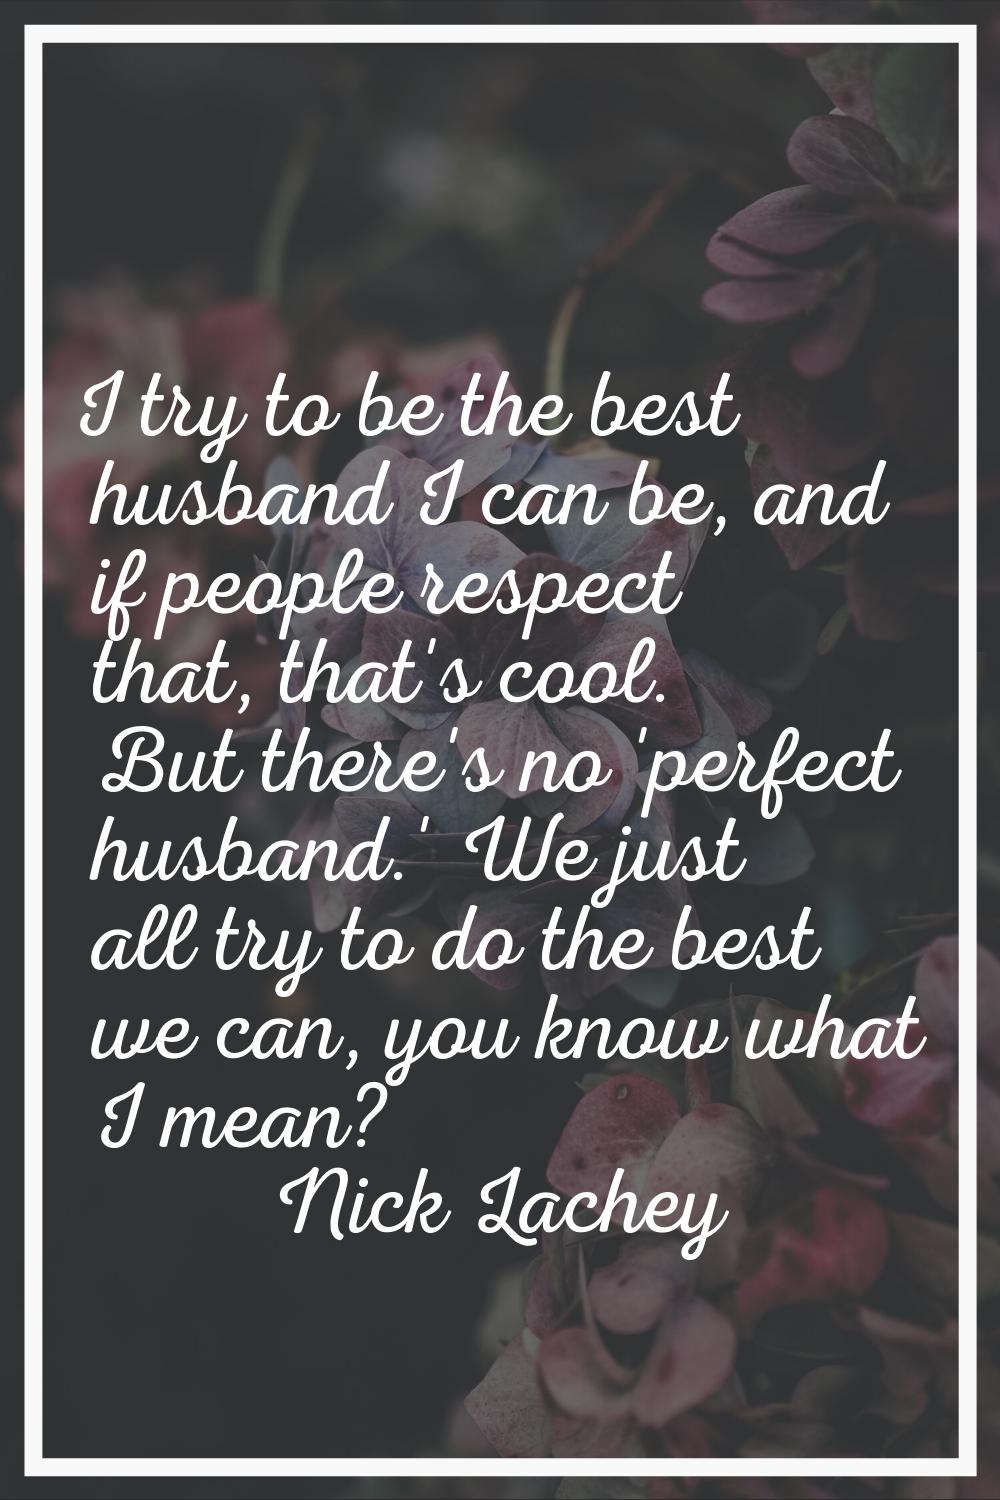 I try to be the best husband I can be, and if people respect that, that's cool. But there's no 'per